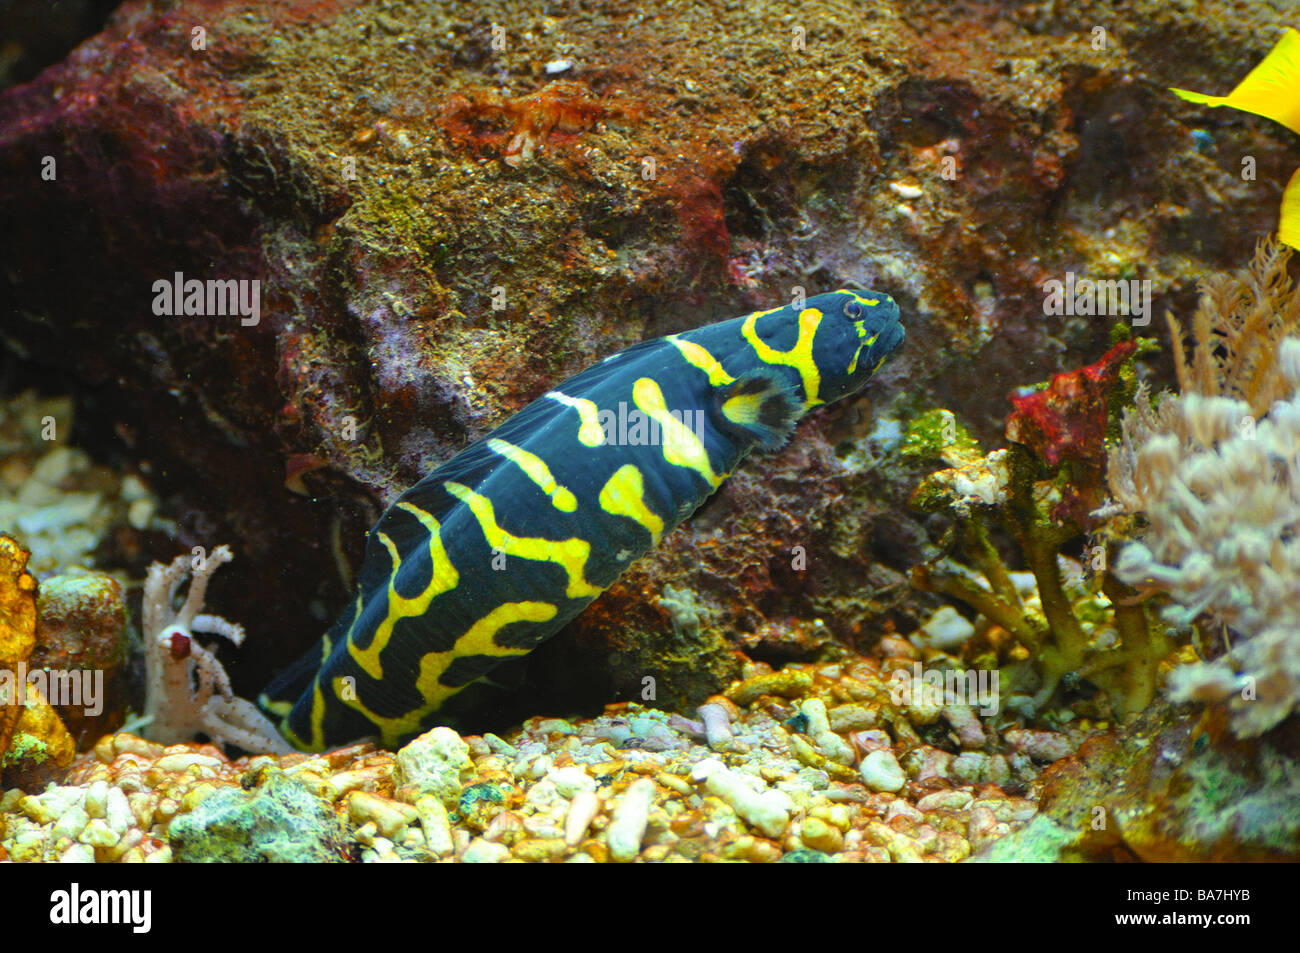 Engineer goby (Pholidichthys leucotaenia) in coral reef Stock Photo